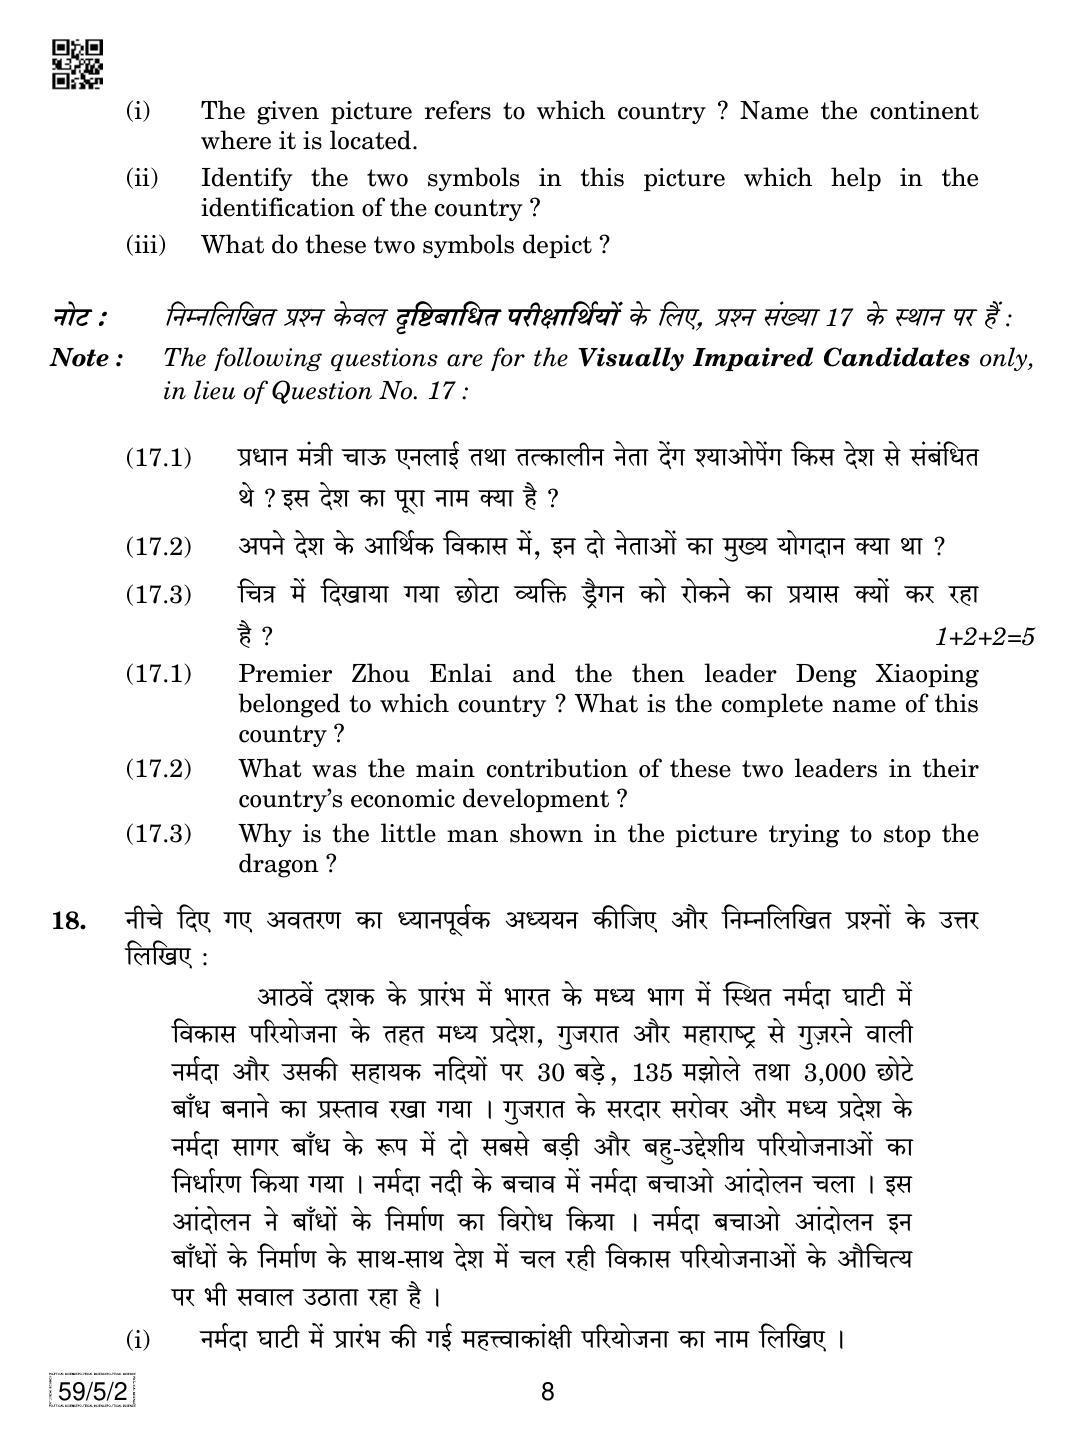 CBSE Class 12 59-5-2 Political Science 2019 Question Paper - Page 8